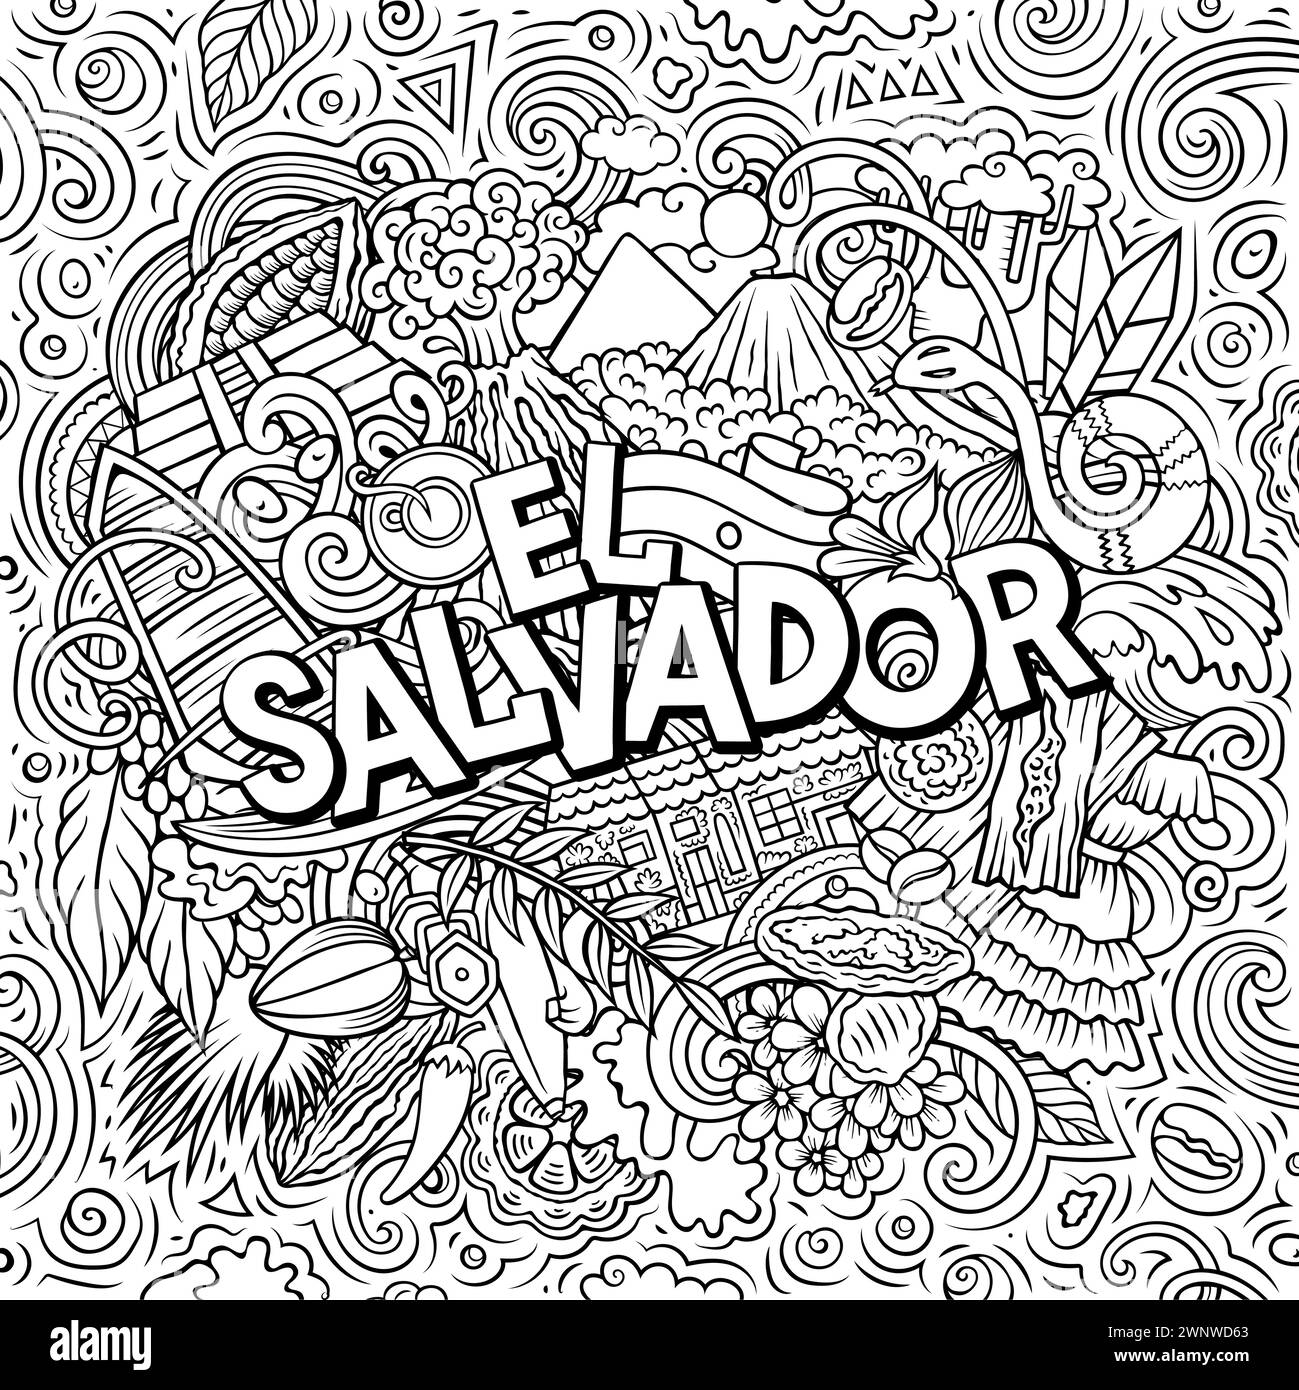 Vector funny doodle illustration with El Salvador theme. Vibrant and eye-catching design, capturing the essence of Central America culture and traditi Stock Vector